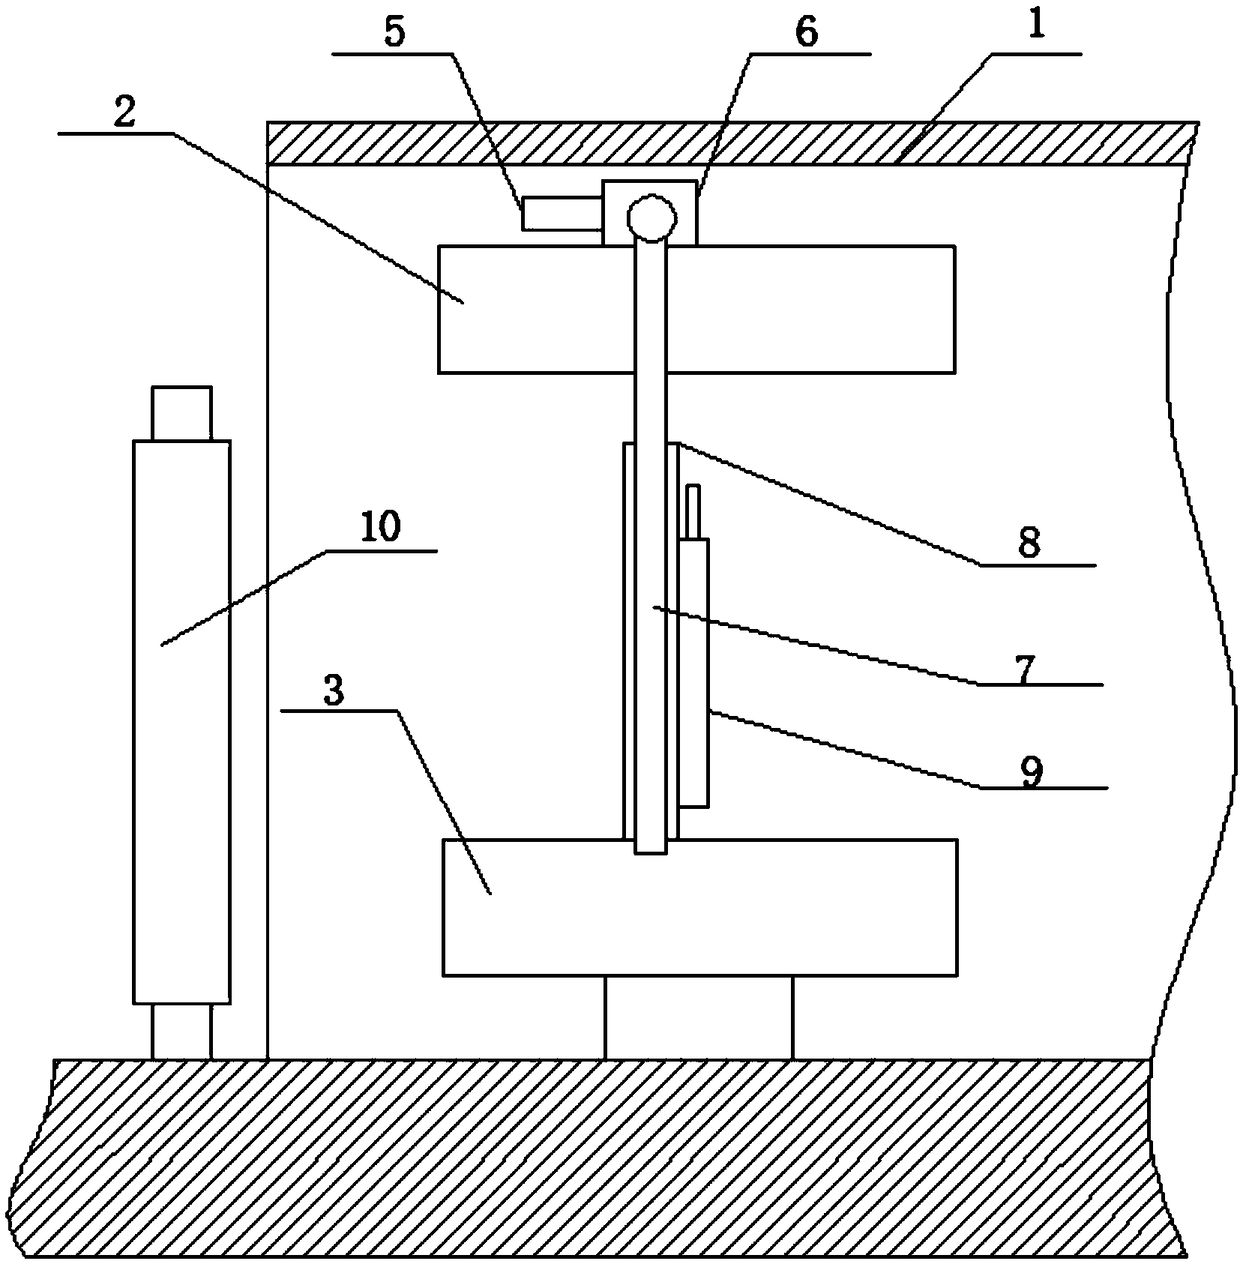 Interlocking and protective device for hot pressing plate of refrigerator van plate and application method thereof